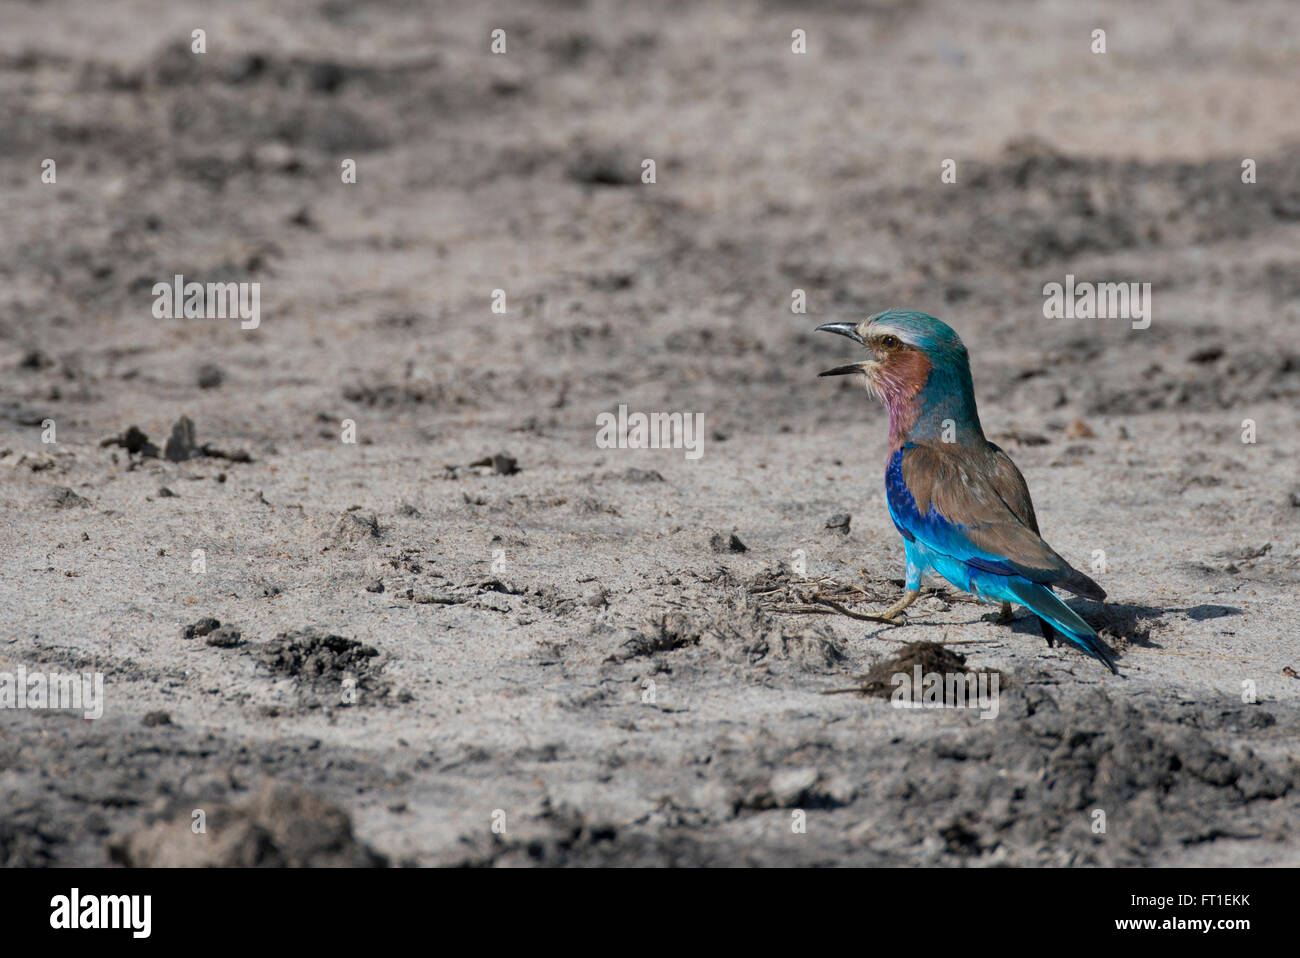 Africa, Zambia, South Luangwa National Park, Mfuwe. Lilac-breasted roller (WILD: Coracias caudatus) Stock Photo